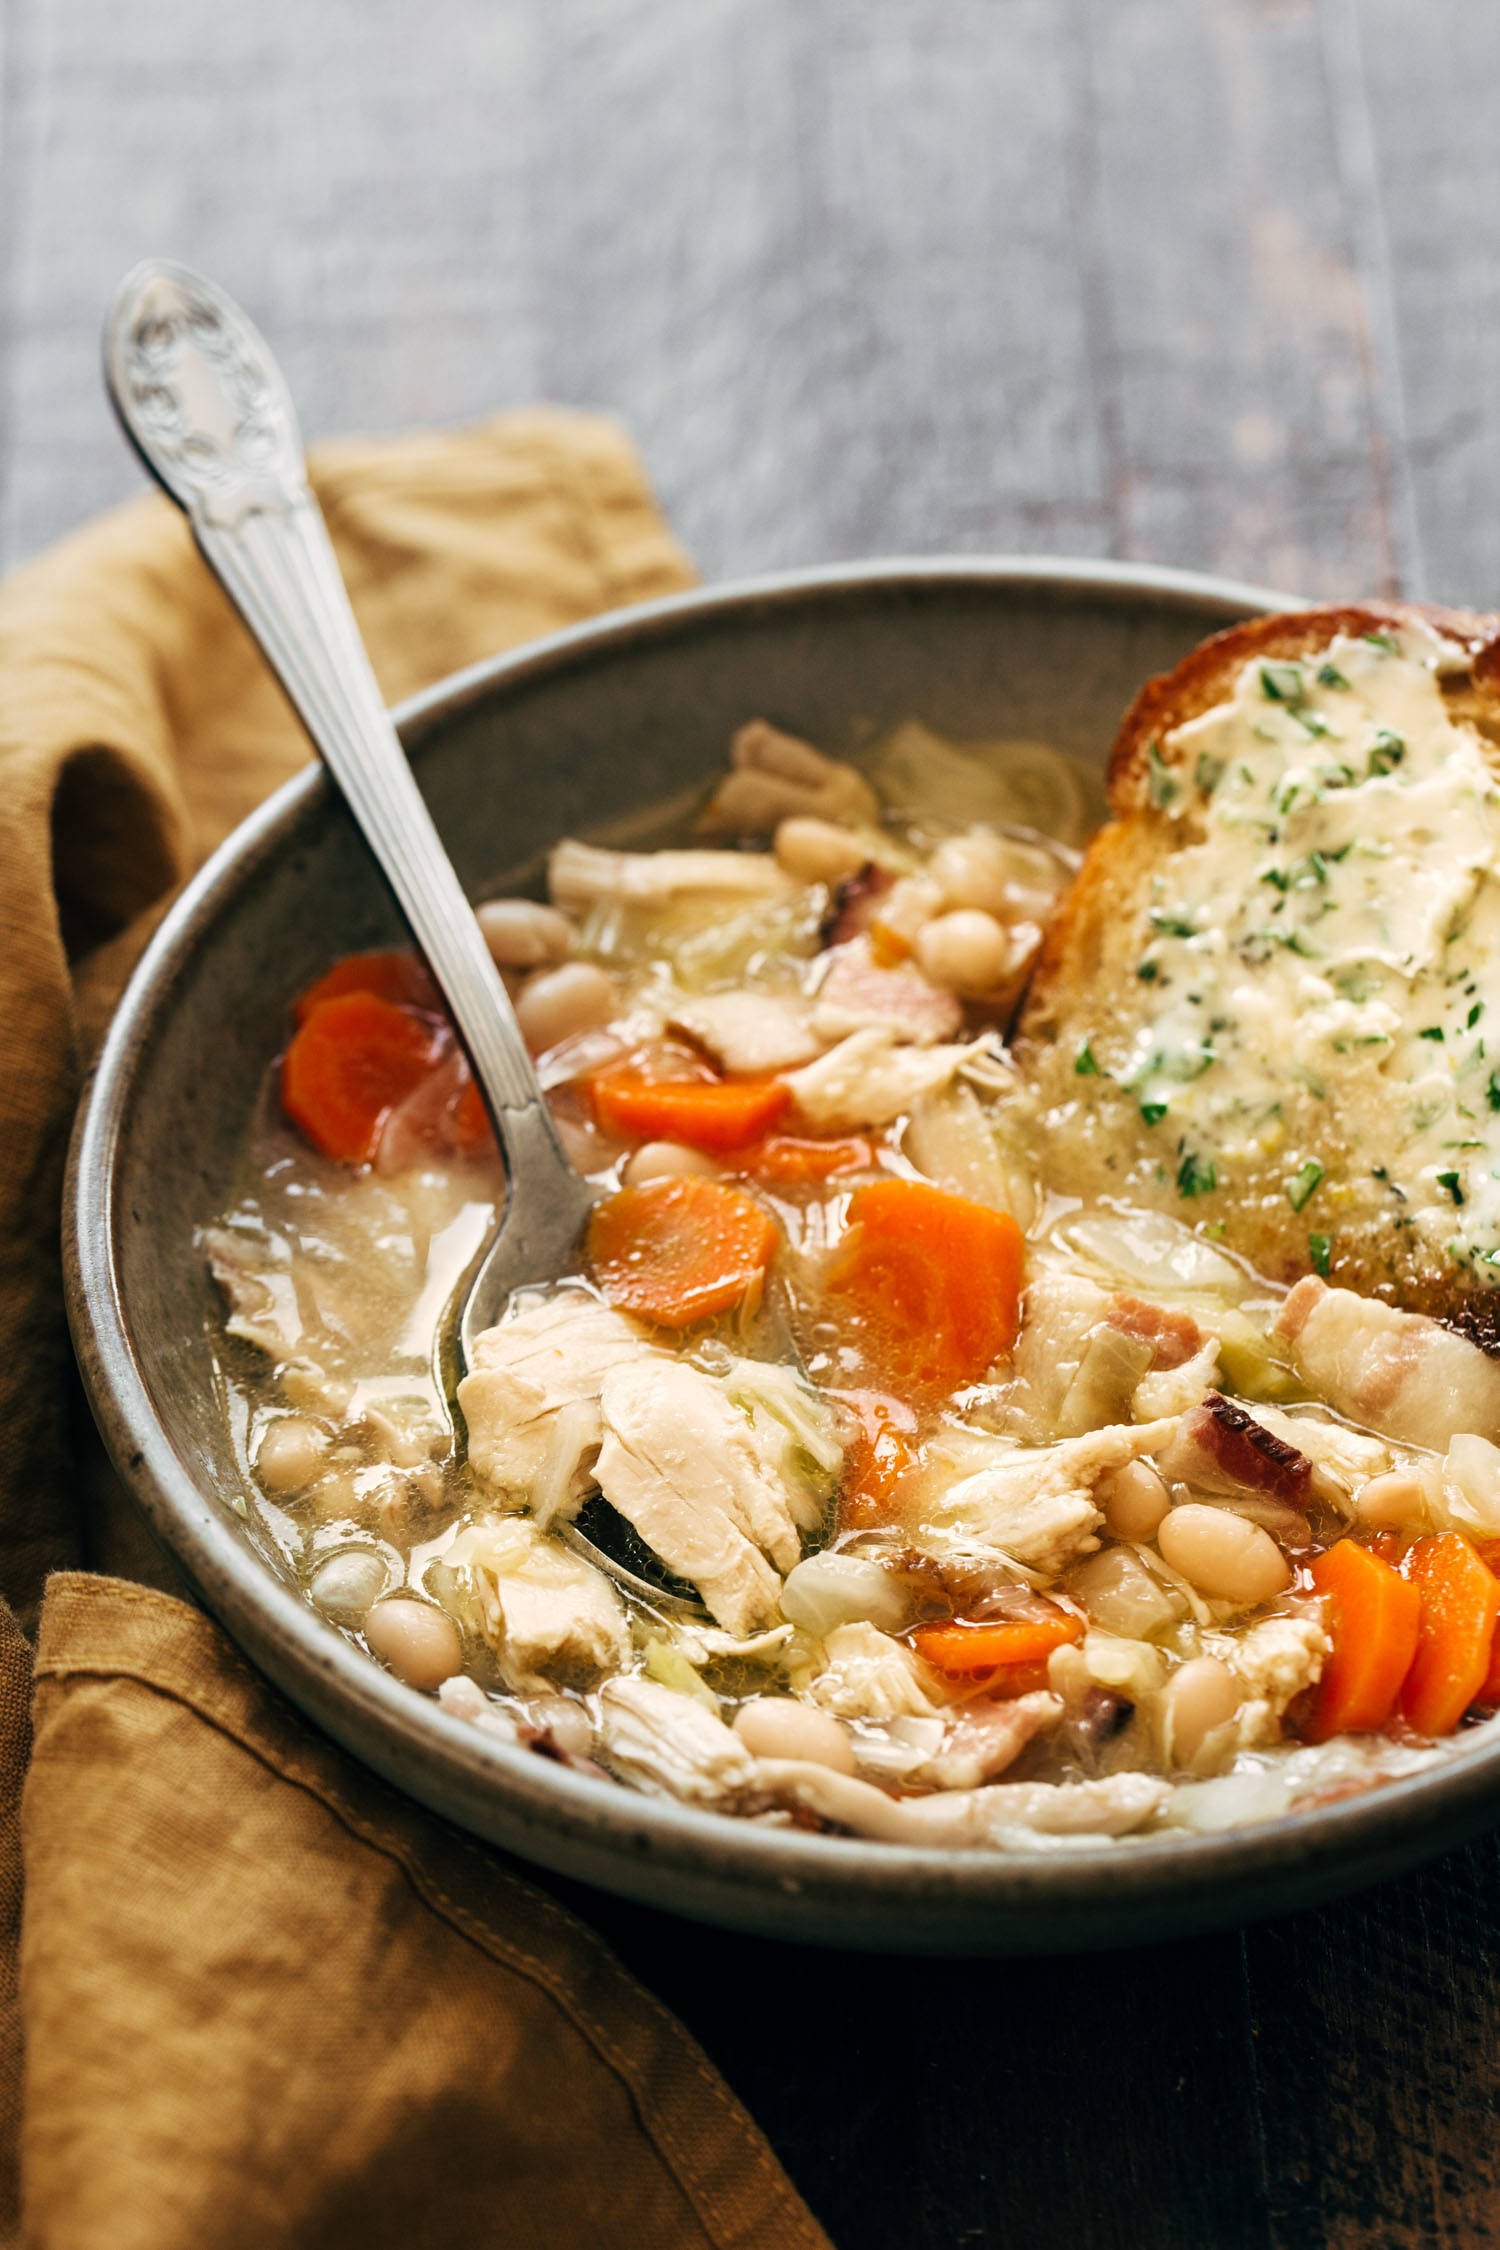 Chicken stew in a bowl with a spoon.